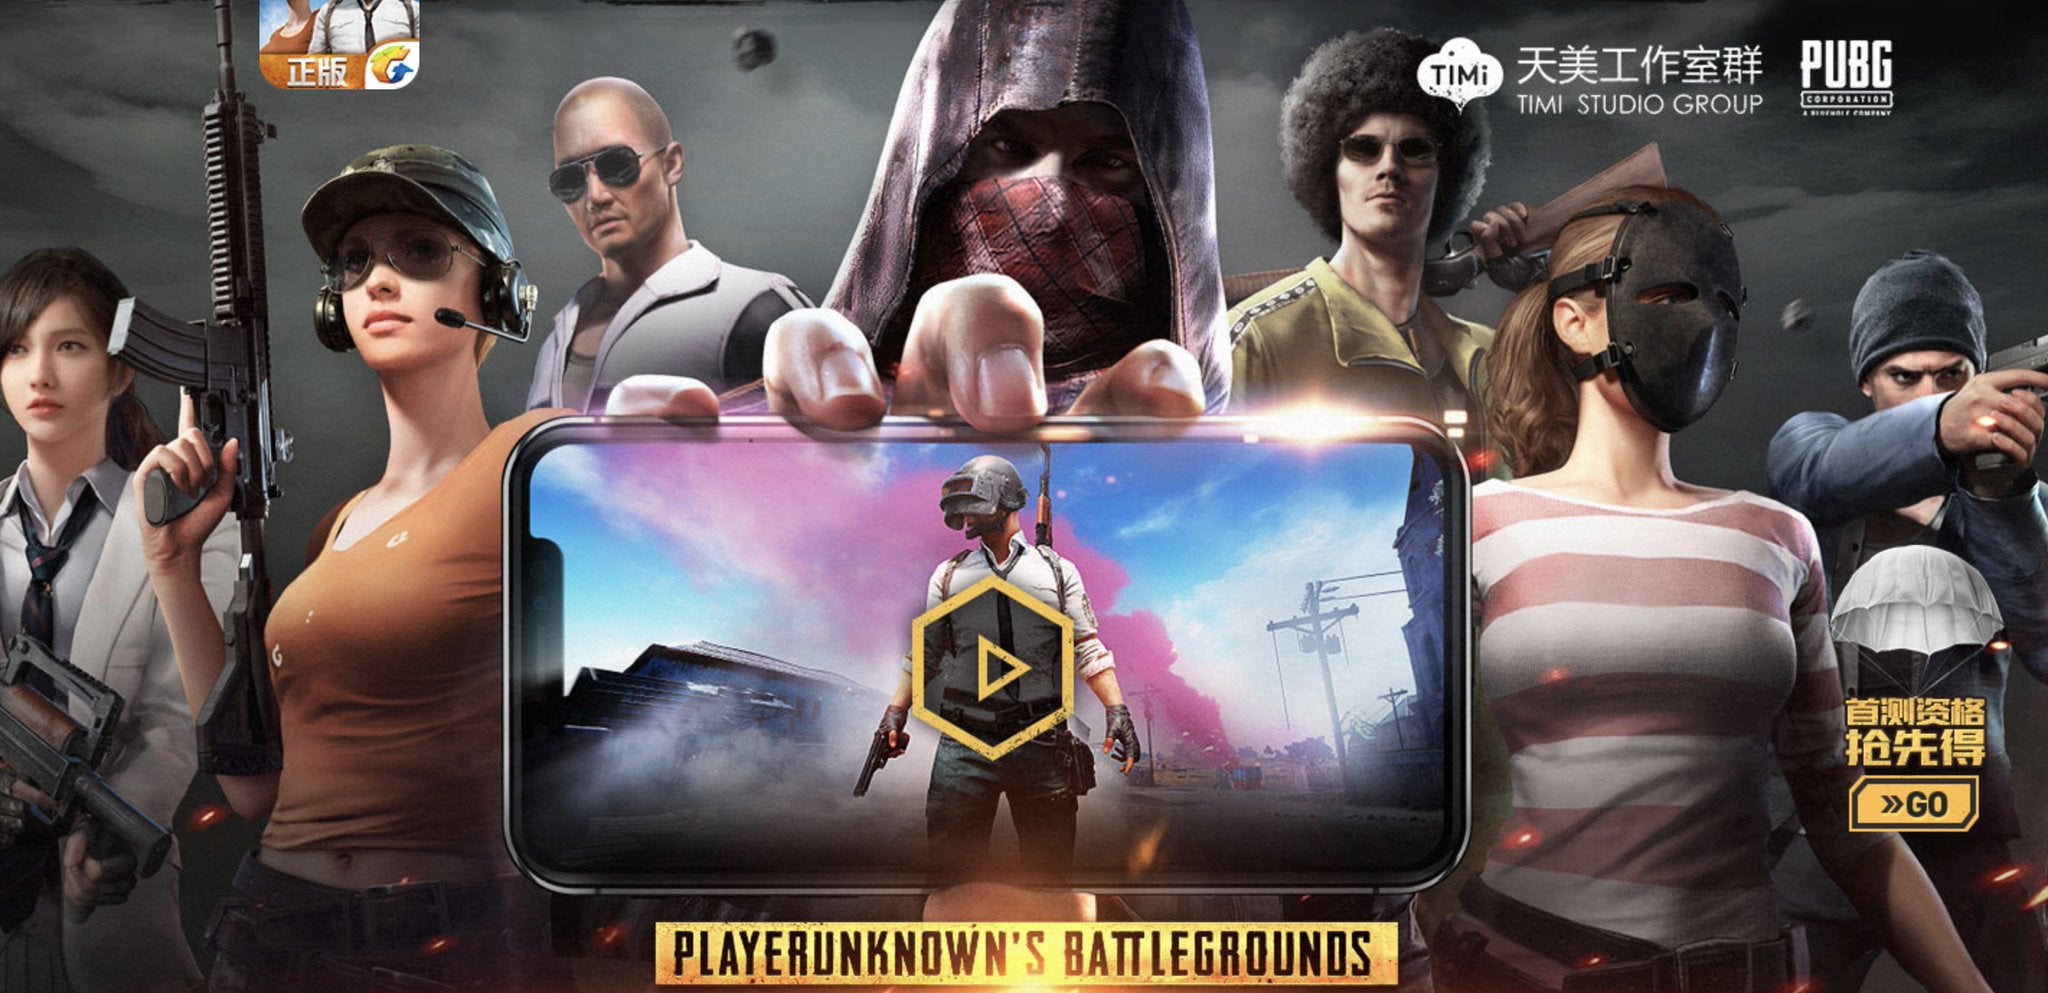 Image for PUBG Mobile invaded by keyboard and mouse users